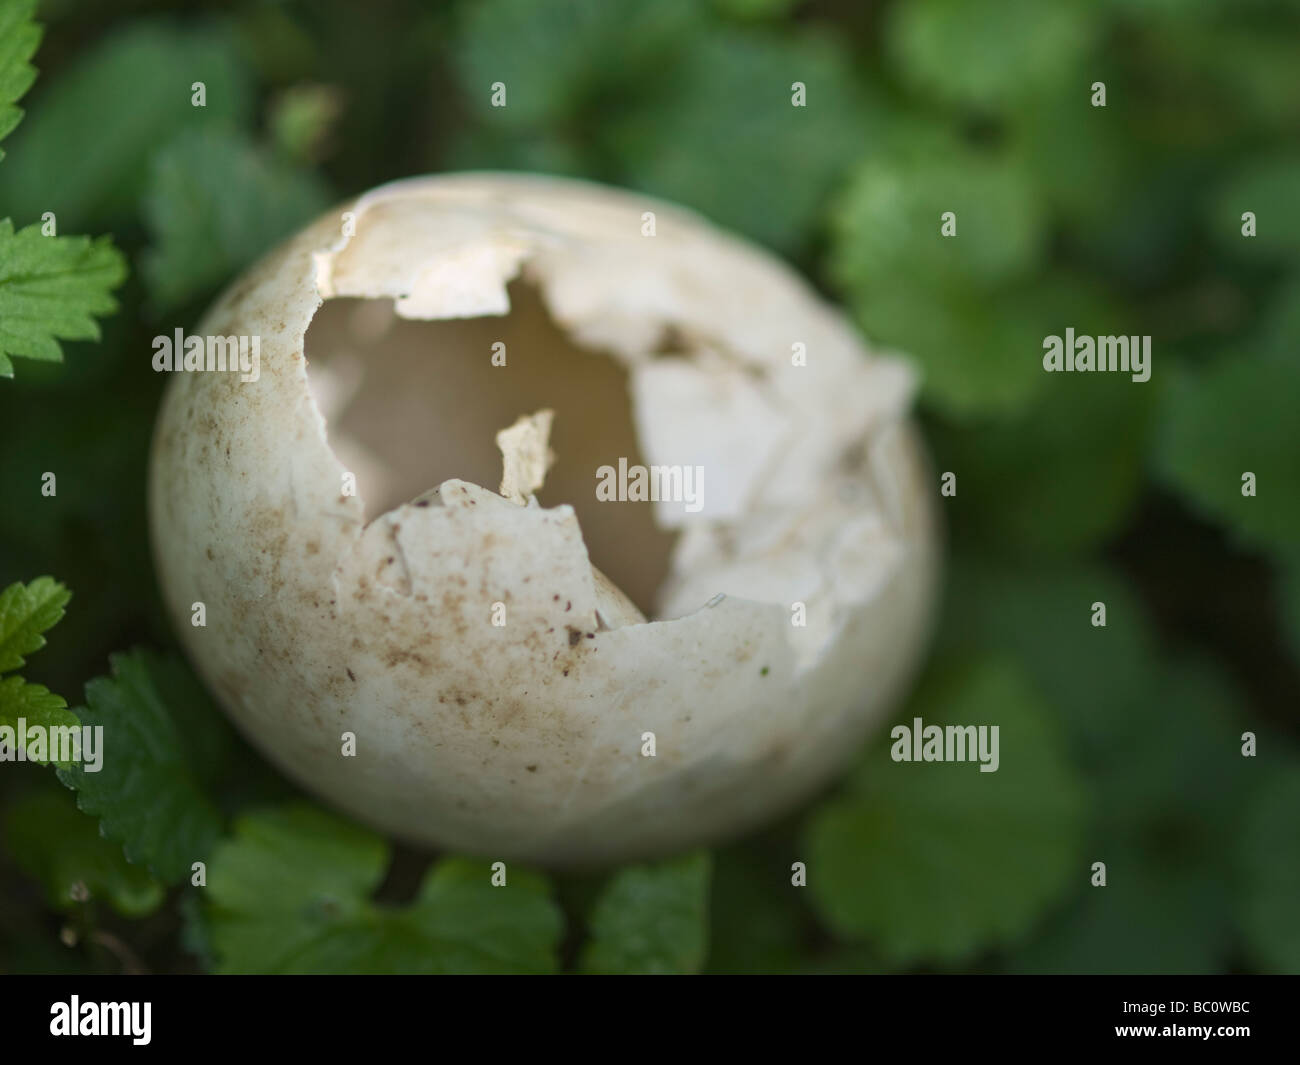 An empty broken egg shell from which a baby bird emerged. Stock Photo